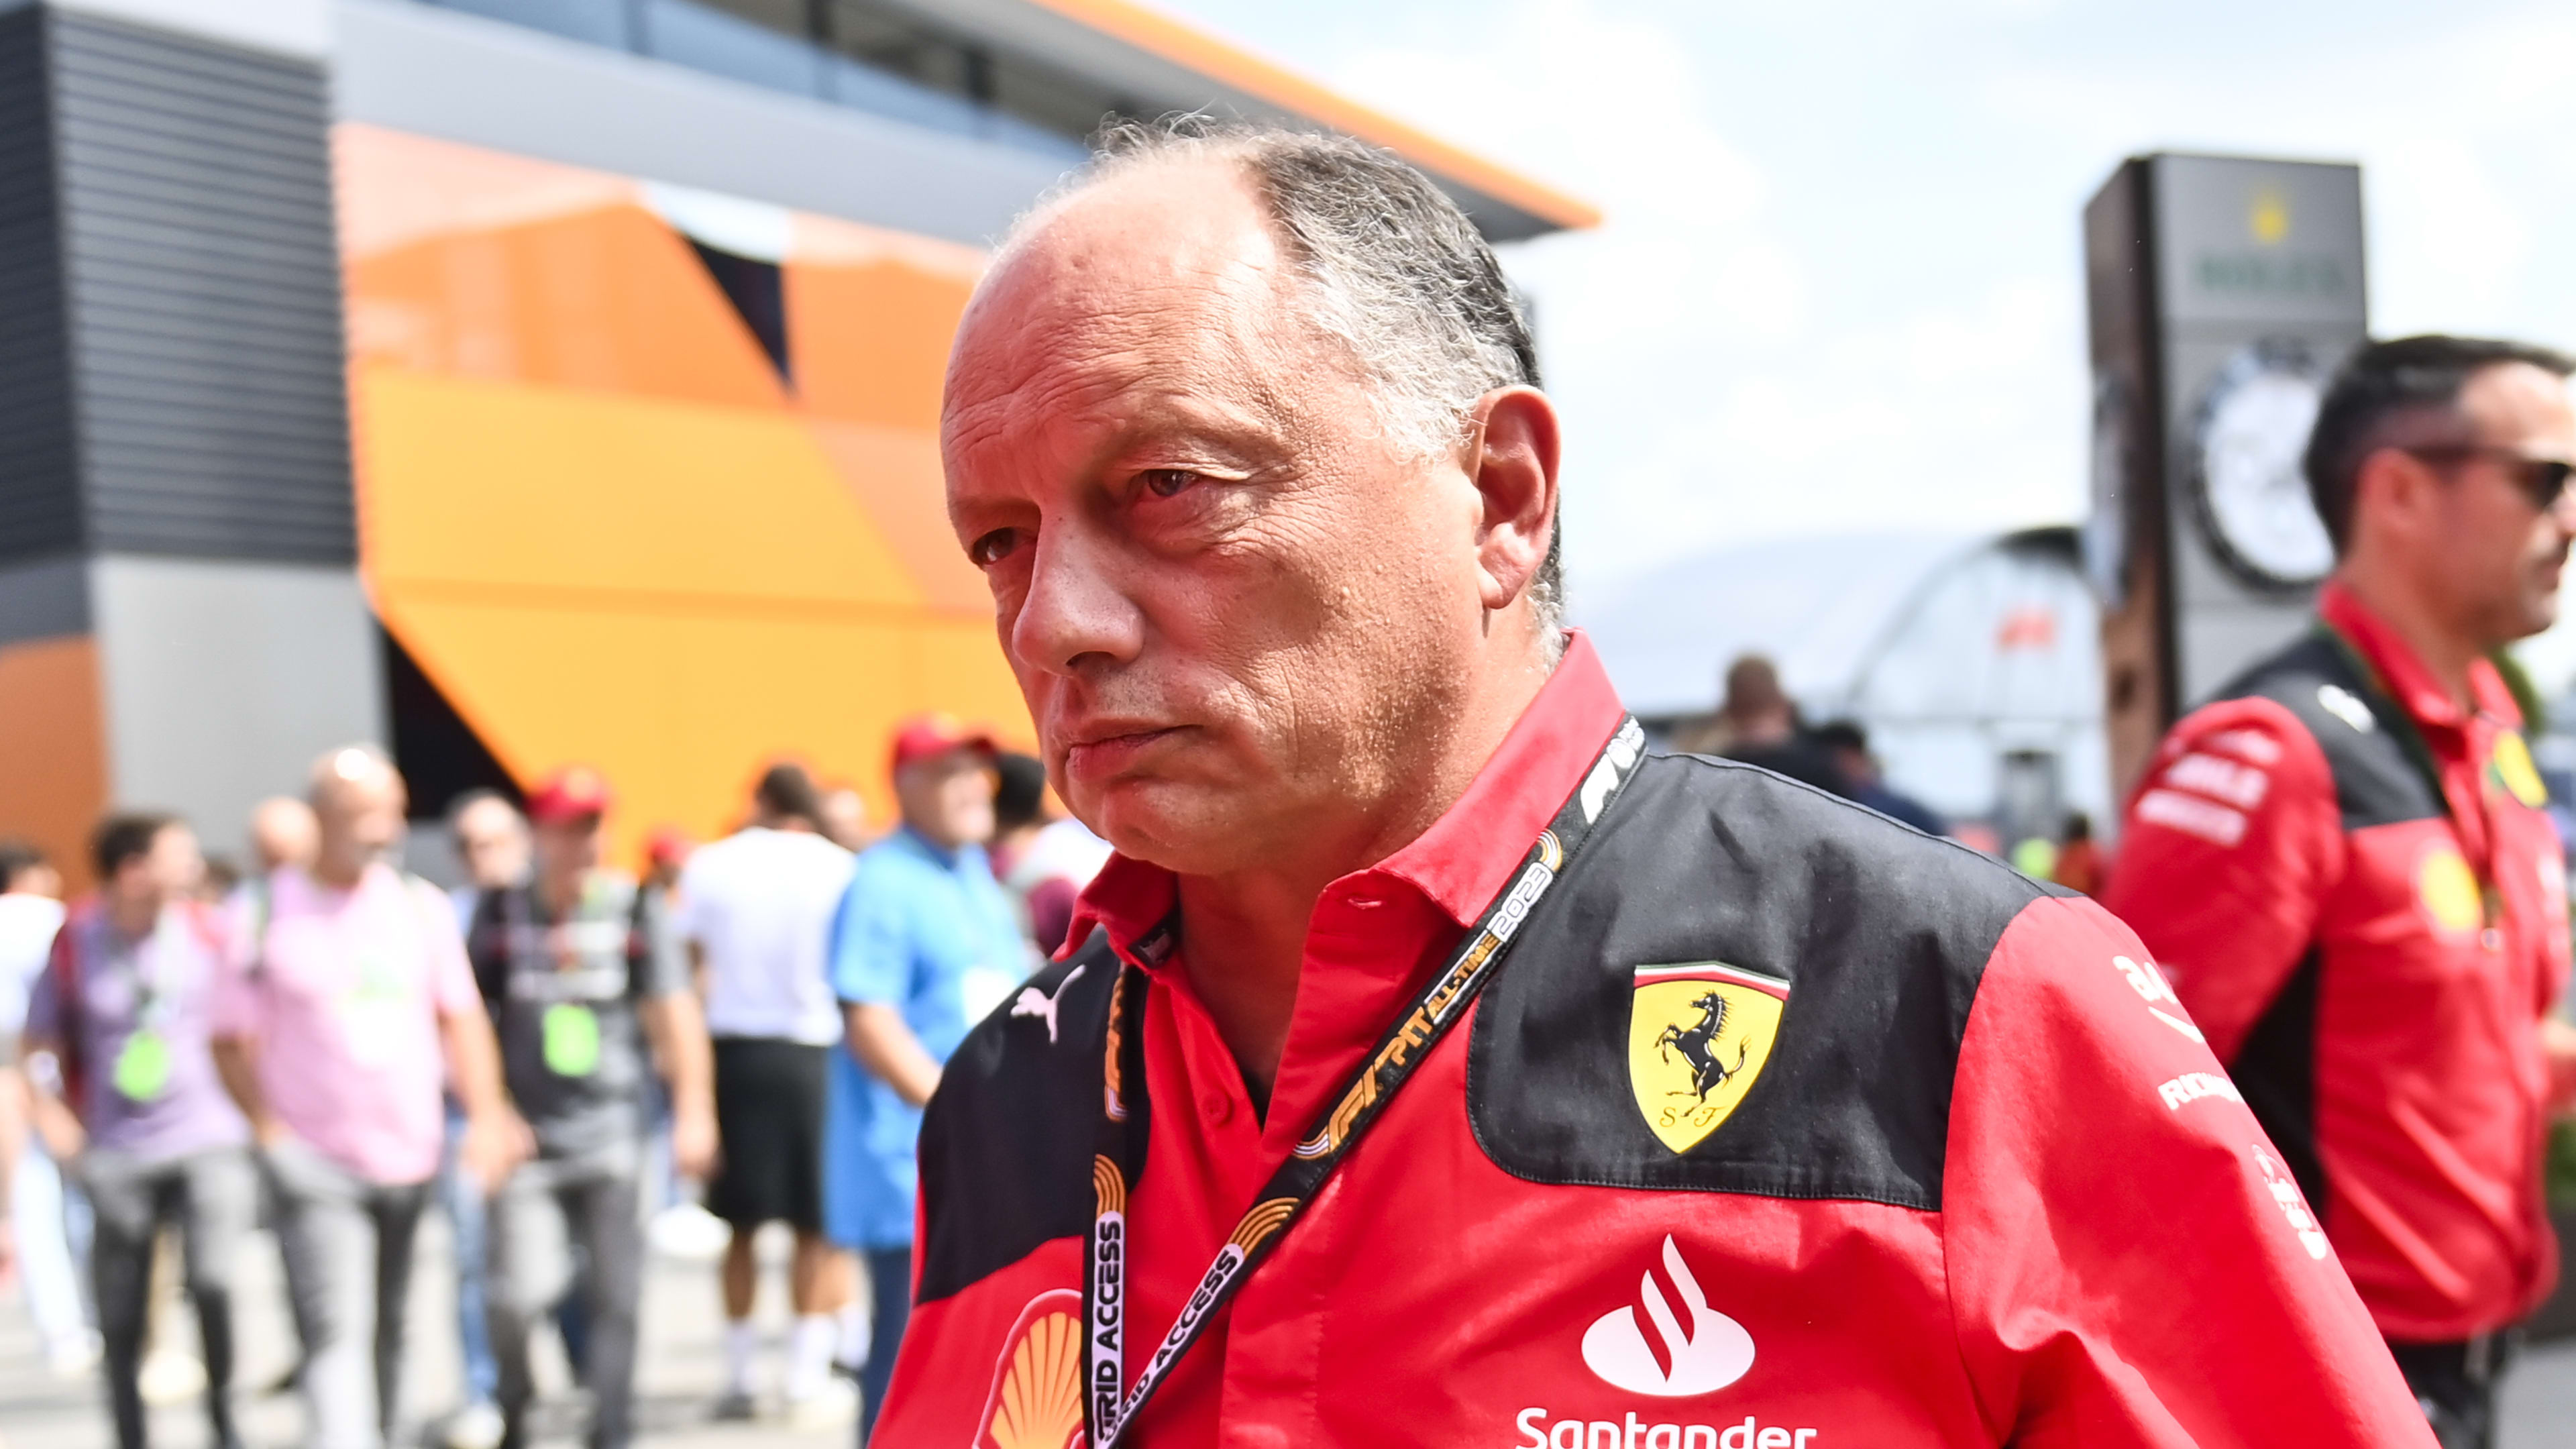 F1. Charles Leclerc reflects on his start to the season and talks about his  relationship with Frédéric Vasseur